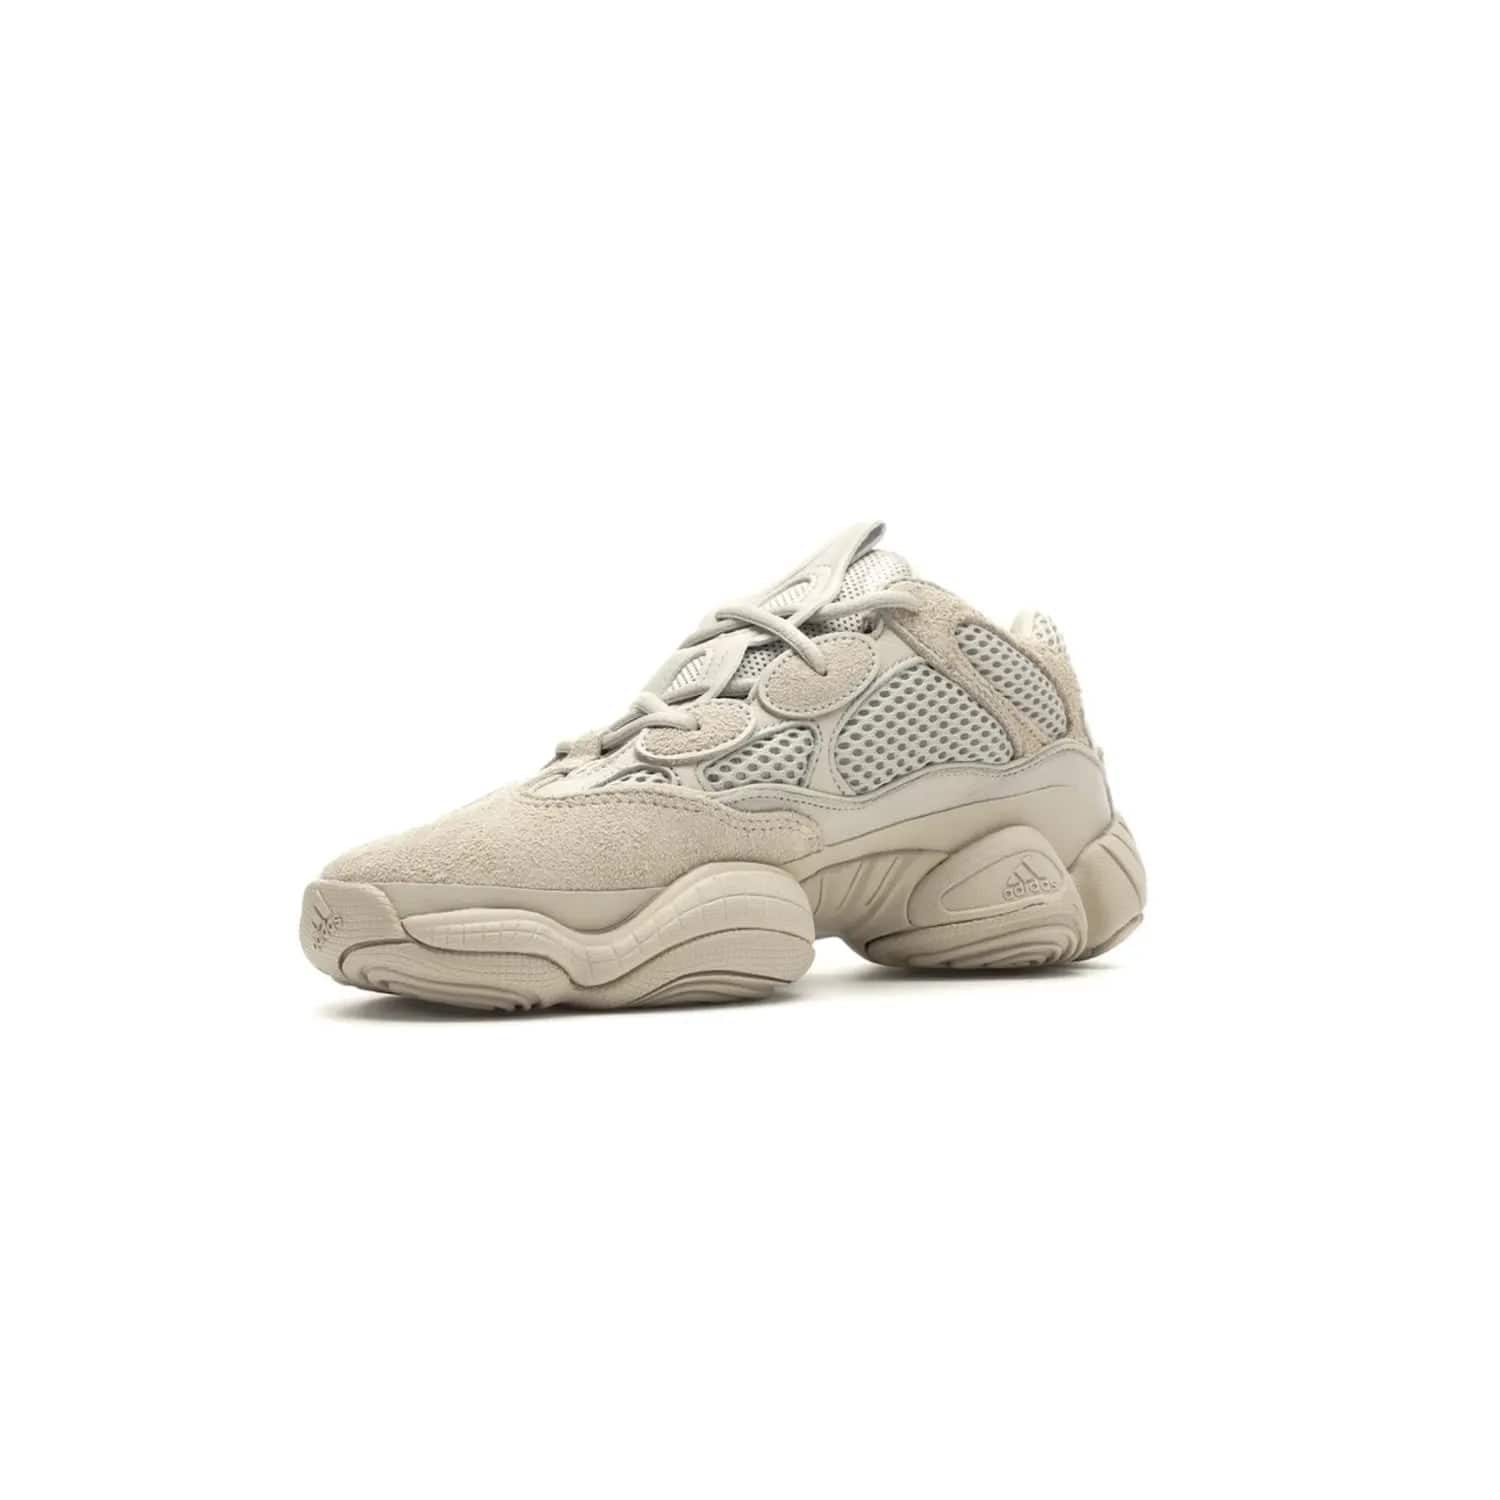 adidas Yeezy 500 Blush - Image 15 - Only at www.BallersClubKickz.com - Step up your sneaker game with the Adidas Yeezy 500 Blush. Monochromatic pale pink palette, hiking-inspired suede/mesh construction, plus adiPRENE sole for comfort and performance. Get the Adidas Yeezy 500 and experience true style and comfort.